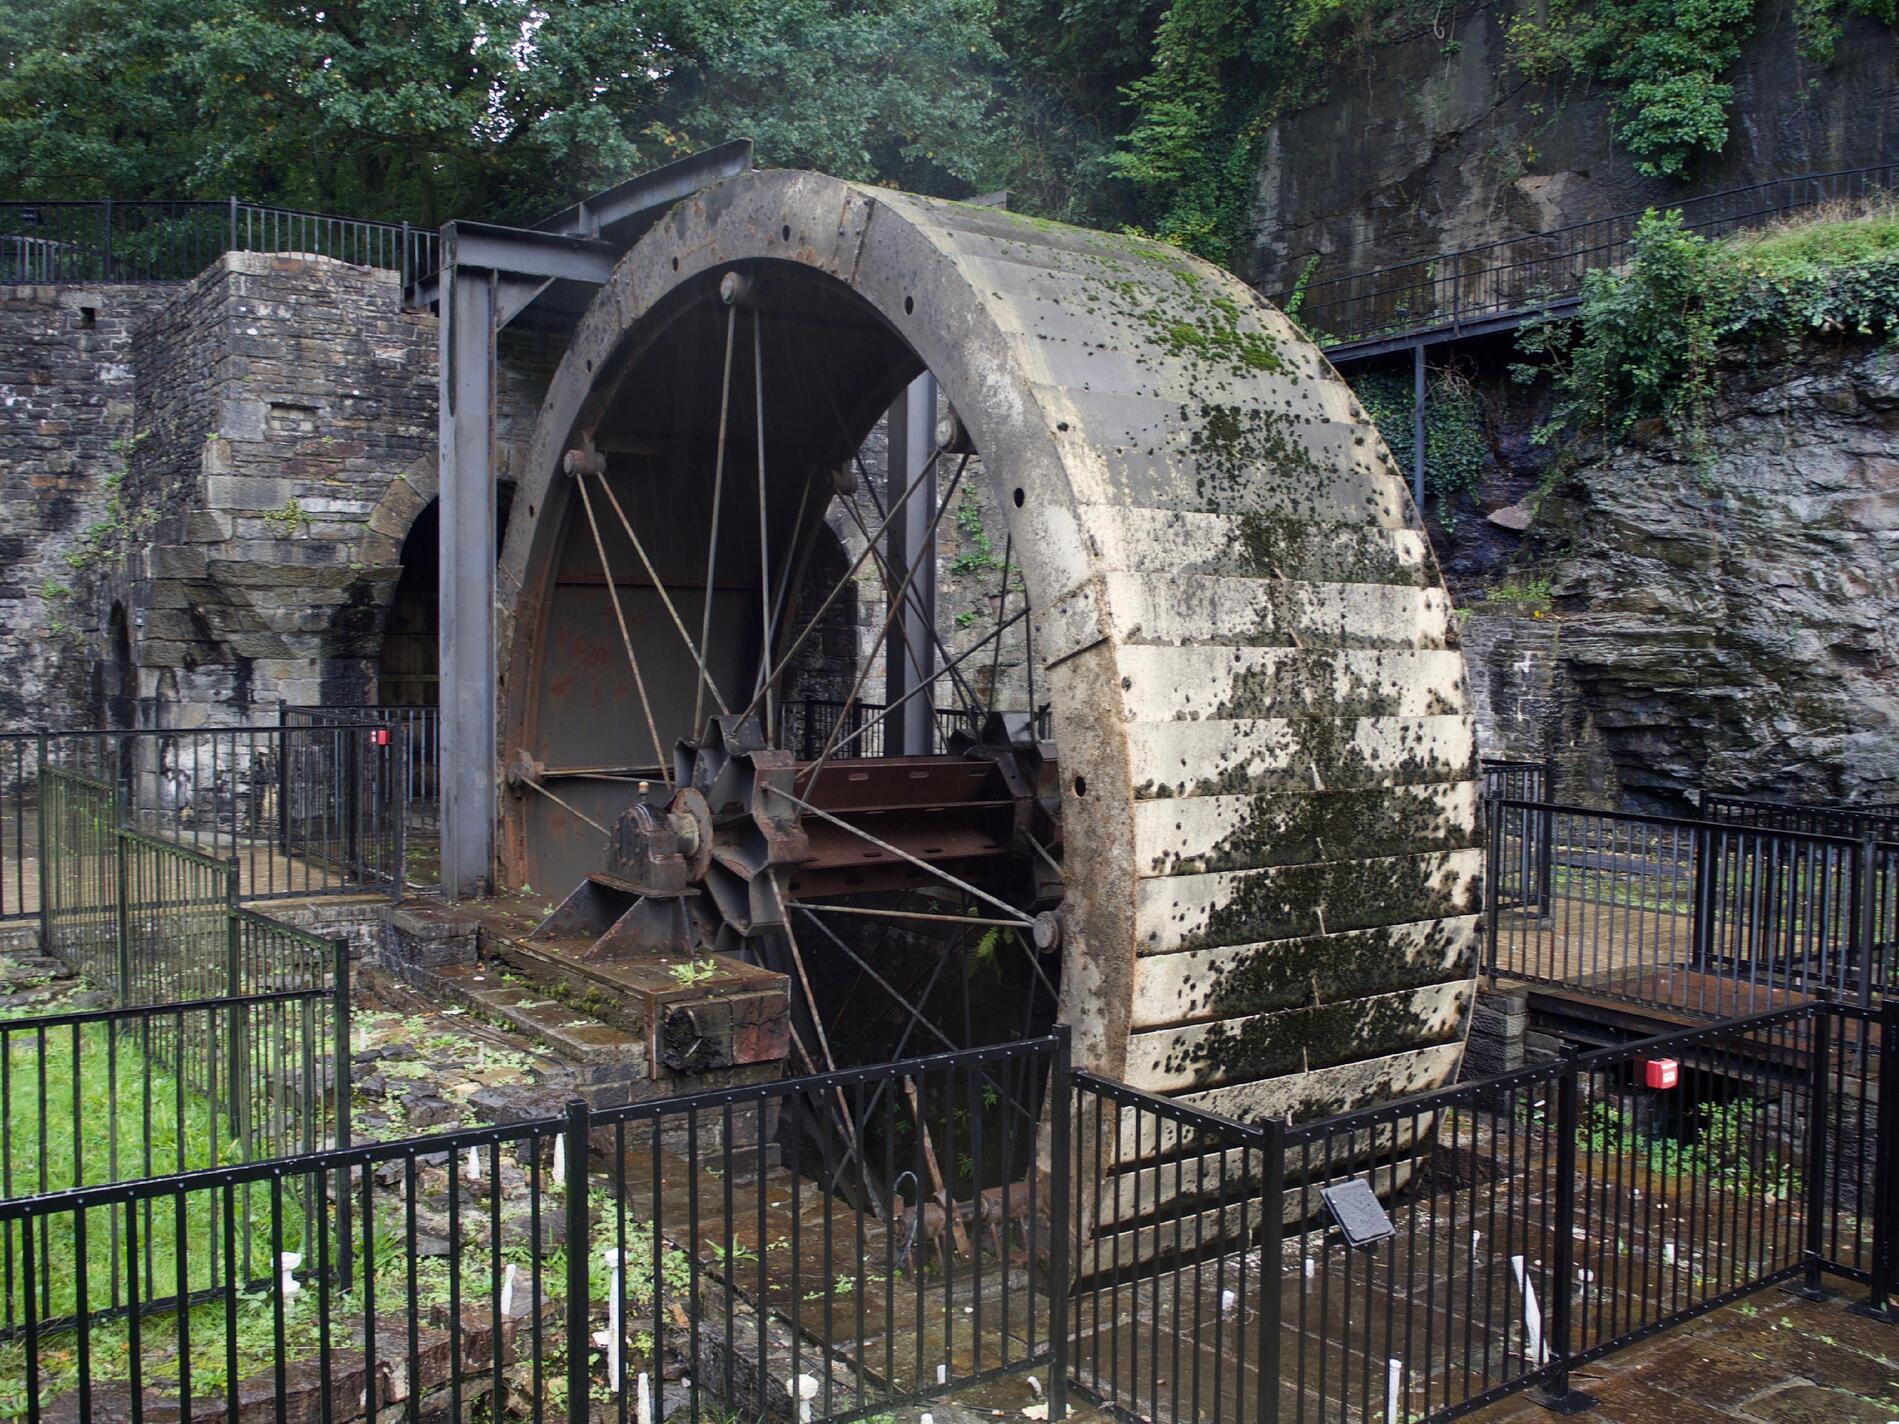 A metal waterwheel surrounded by black safety barriers.